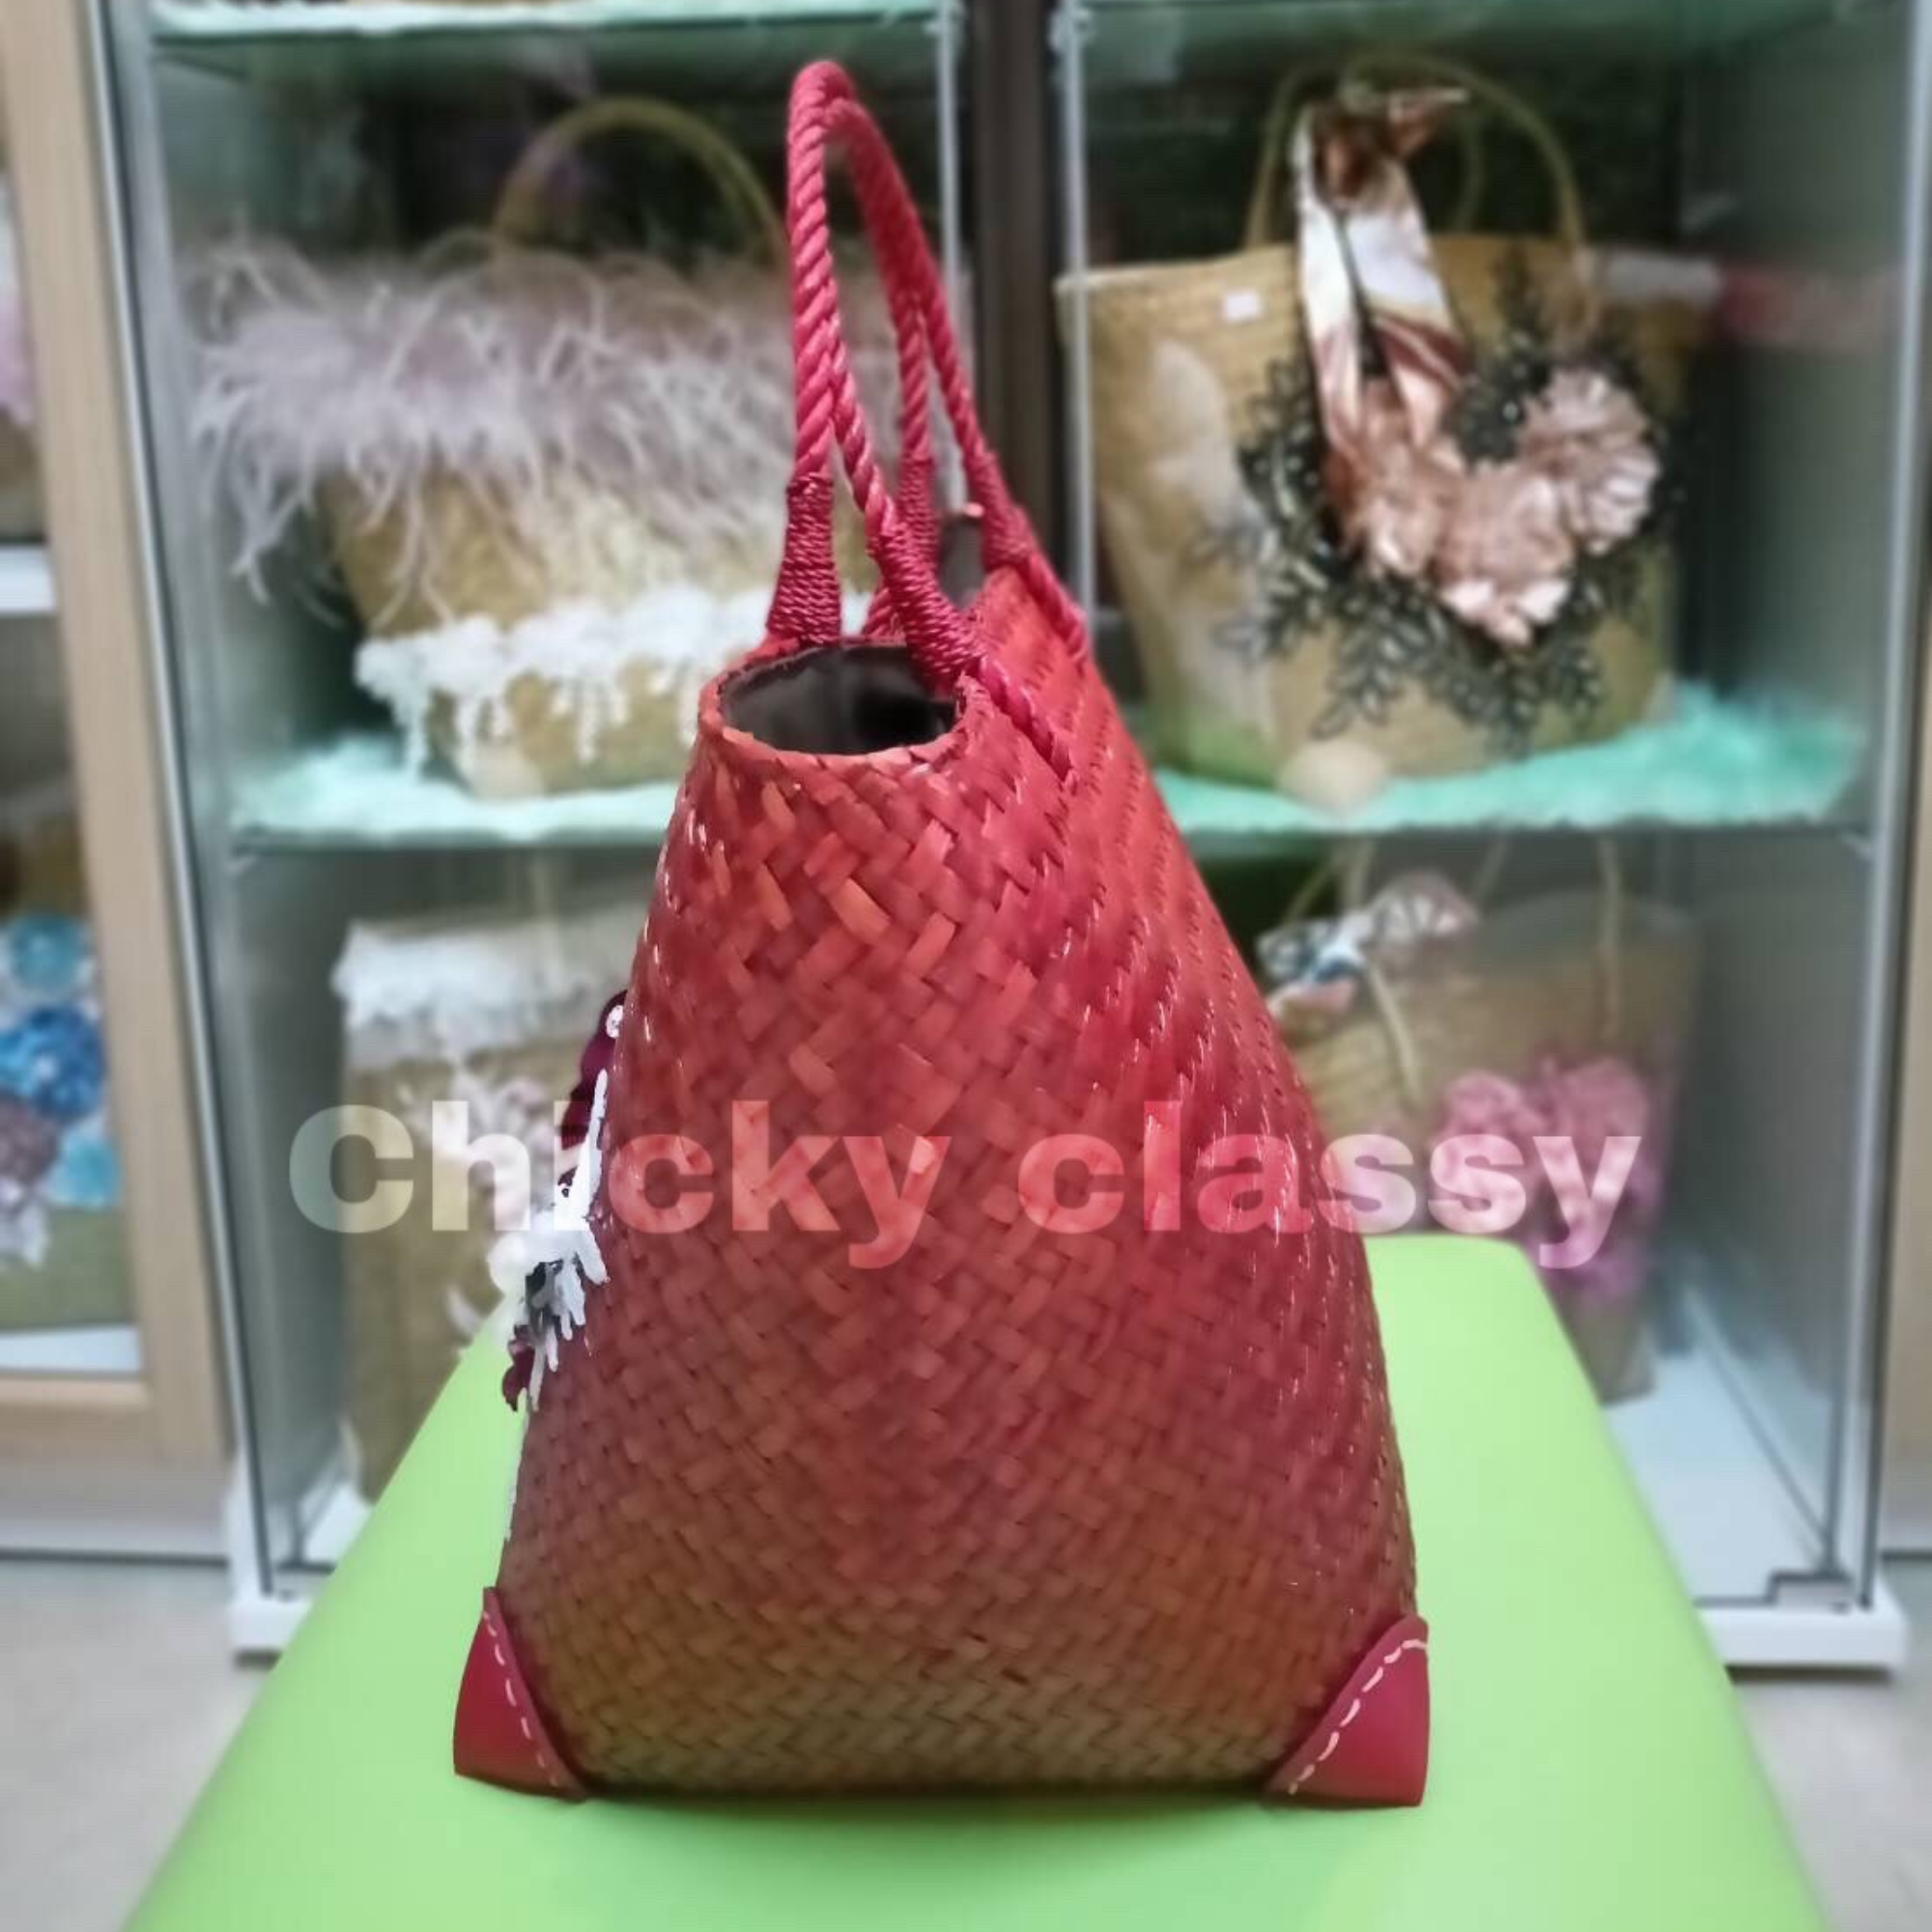 Chicky Classy Red Sweet bag